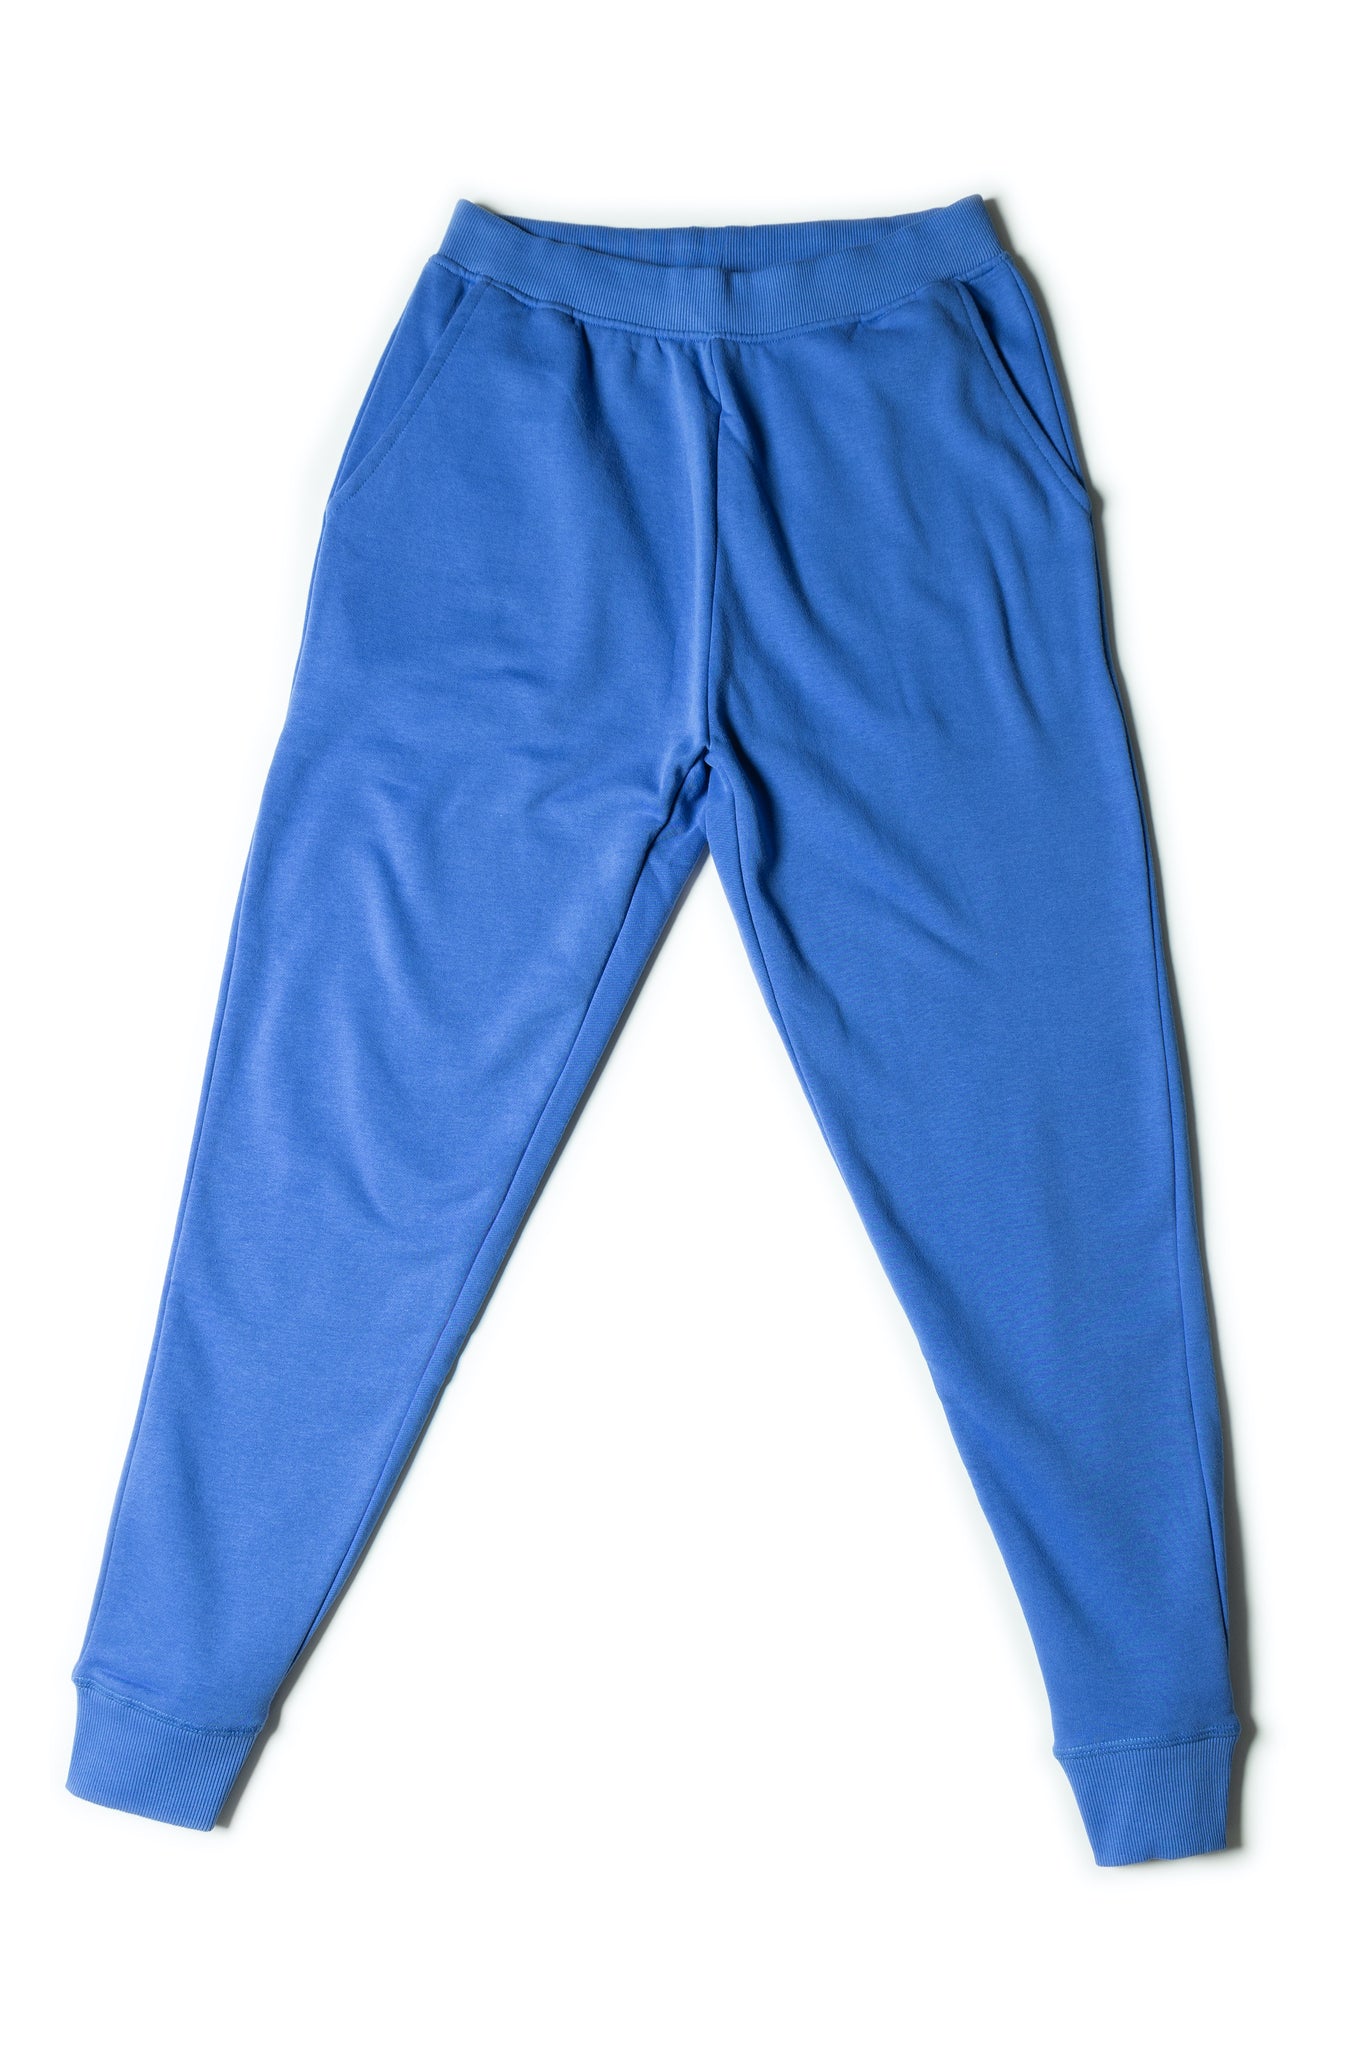 HERO-5020R Unisex Joggers - Royal Blue (Relaxed Fit)